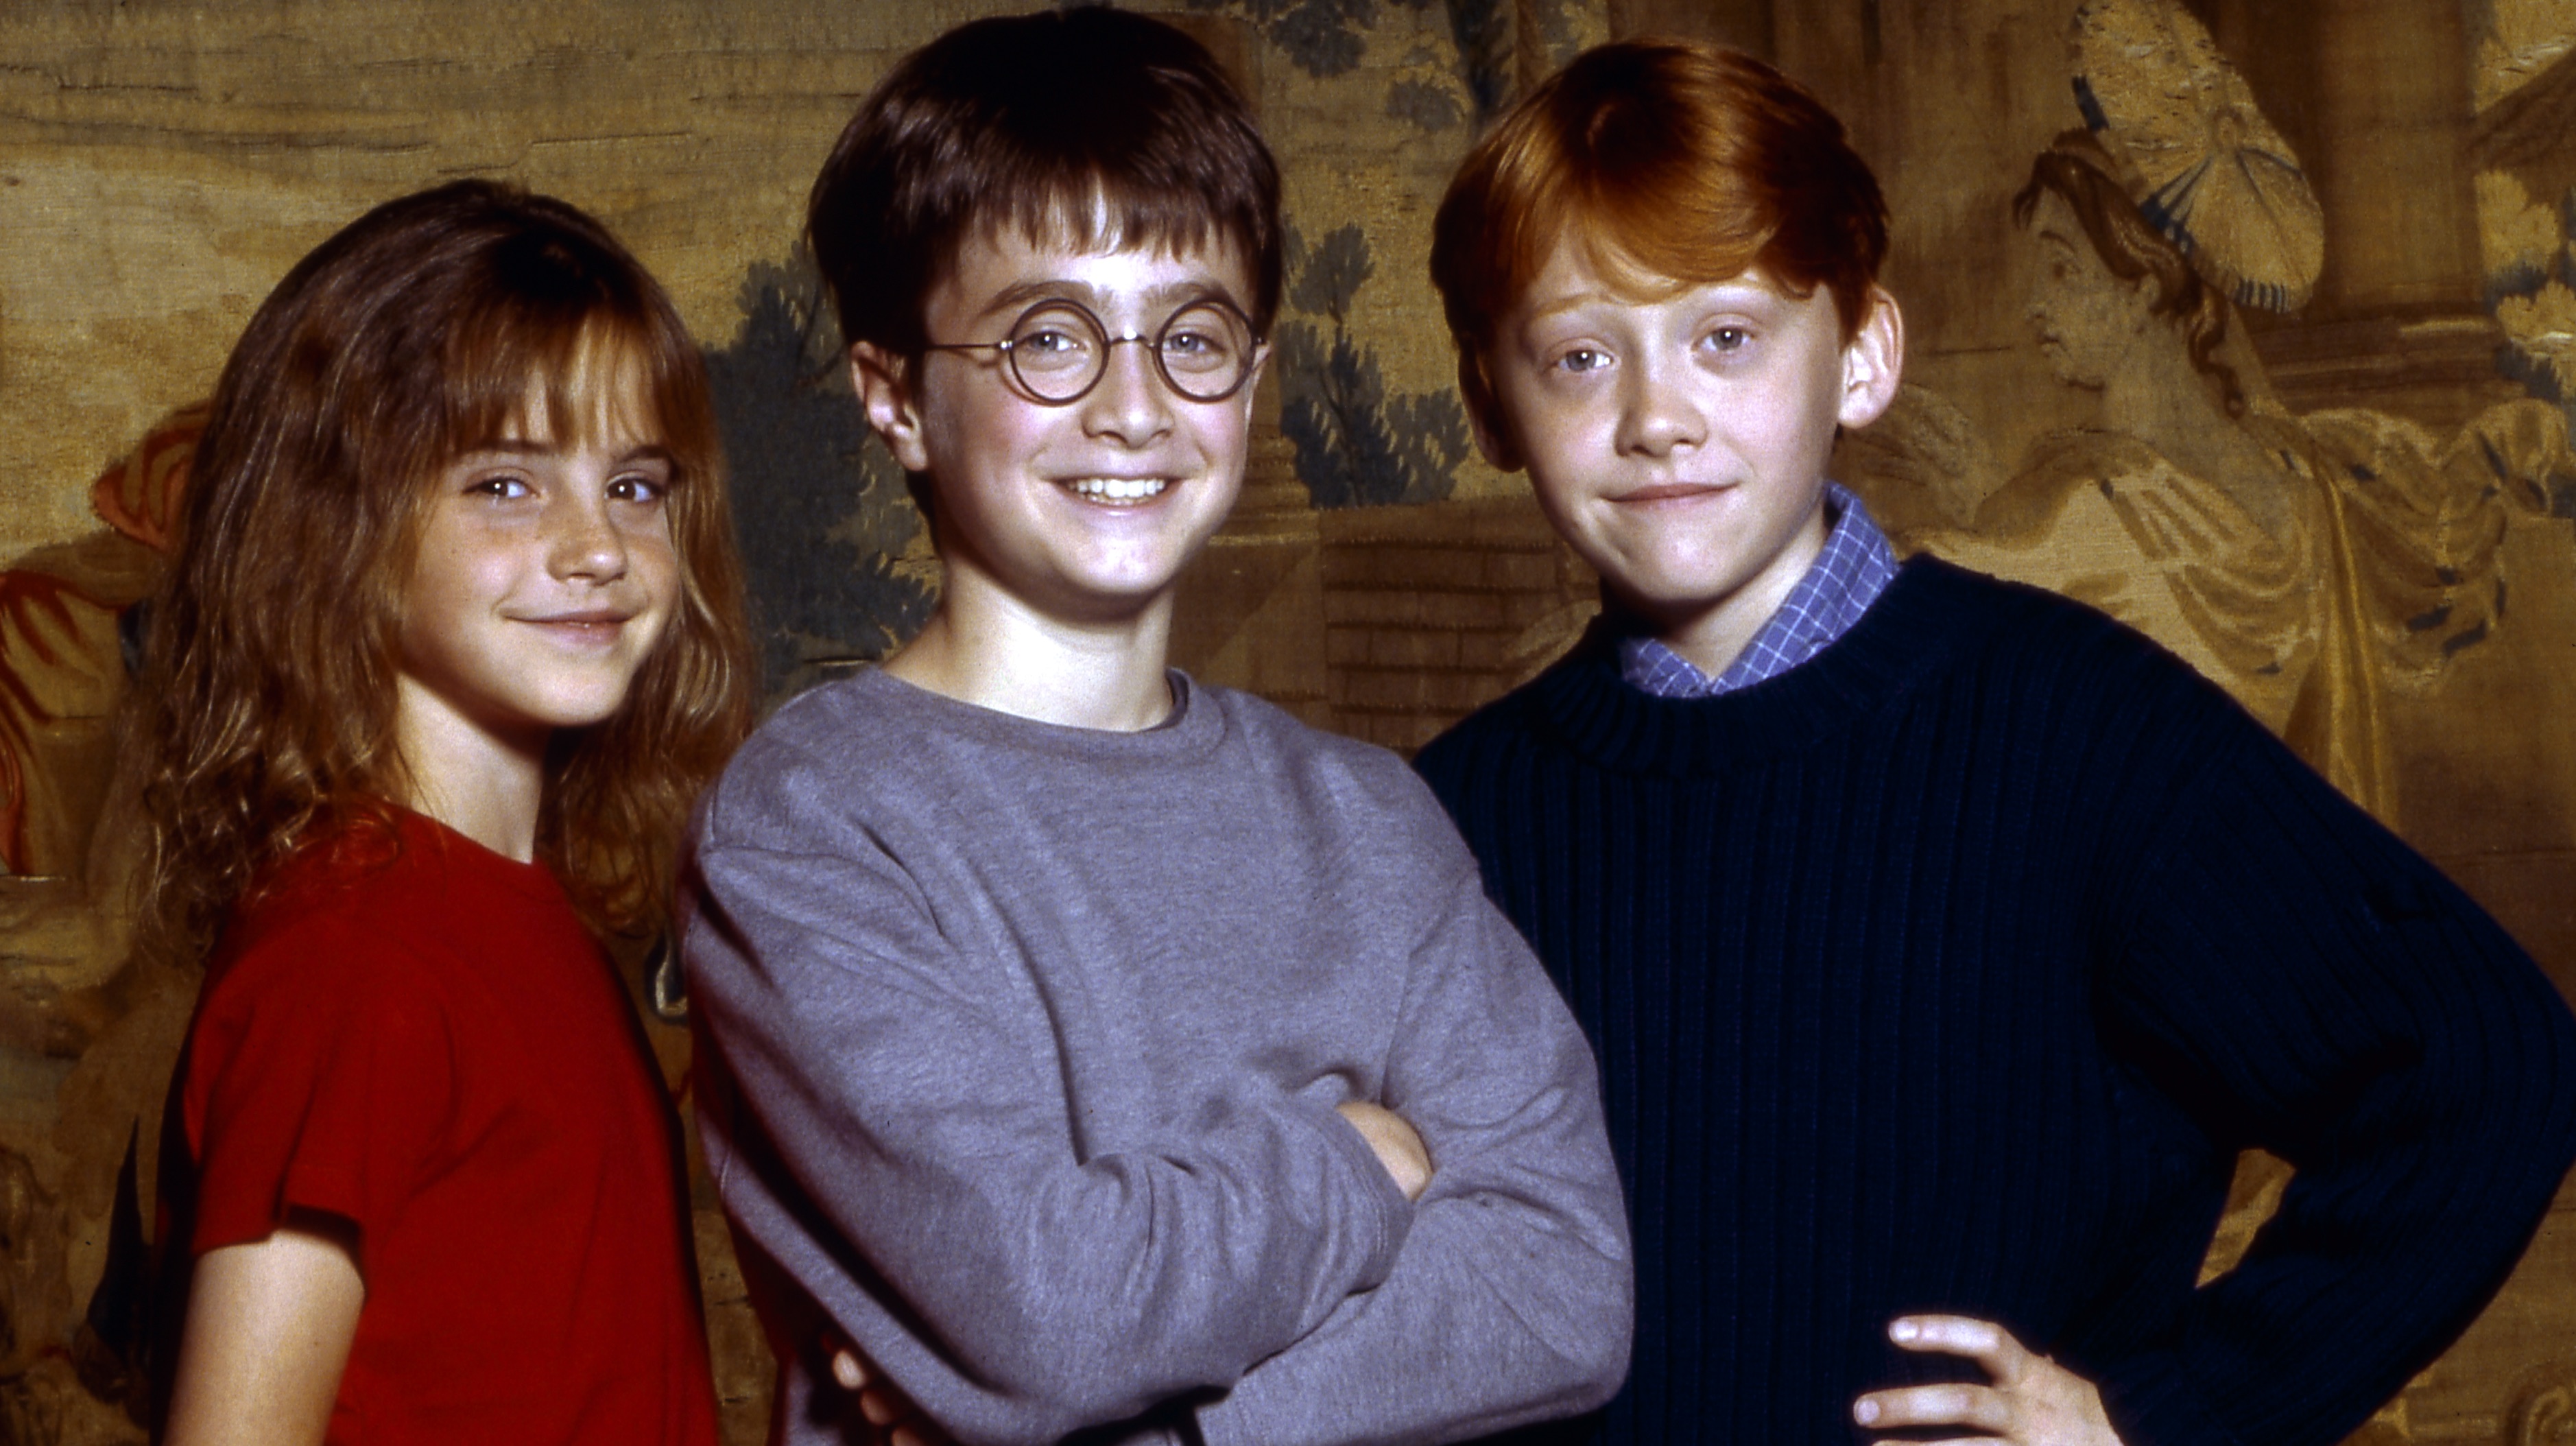 Emma Watson, Daniel Radcliffe, and Rupert Grint in a 2001 publicity image for Harry Potter and the Sorcerer’s Stone, as seen in the Return to Hogwarts special